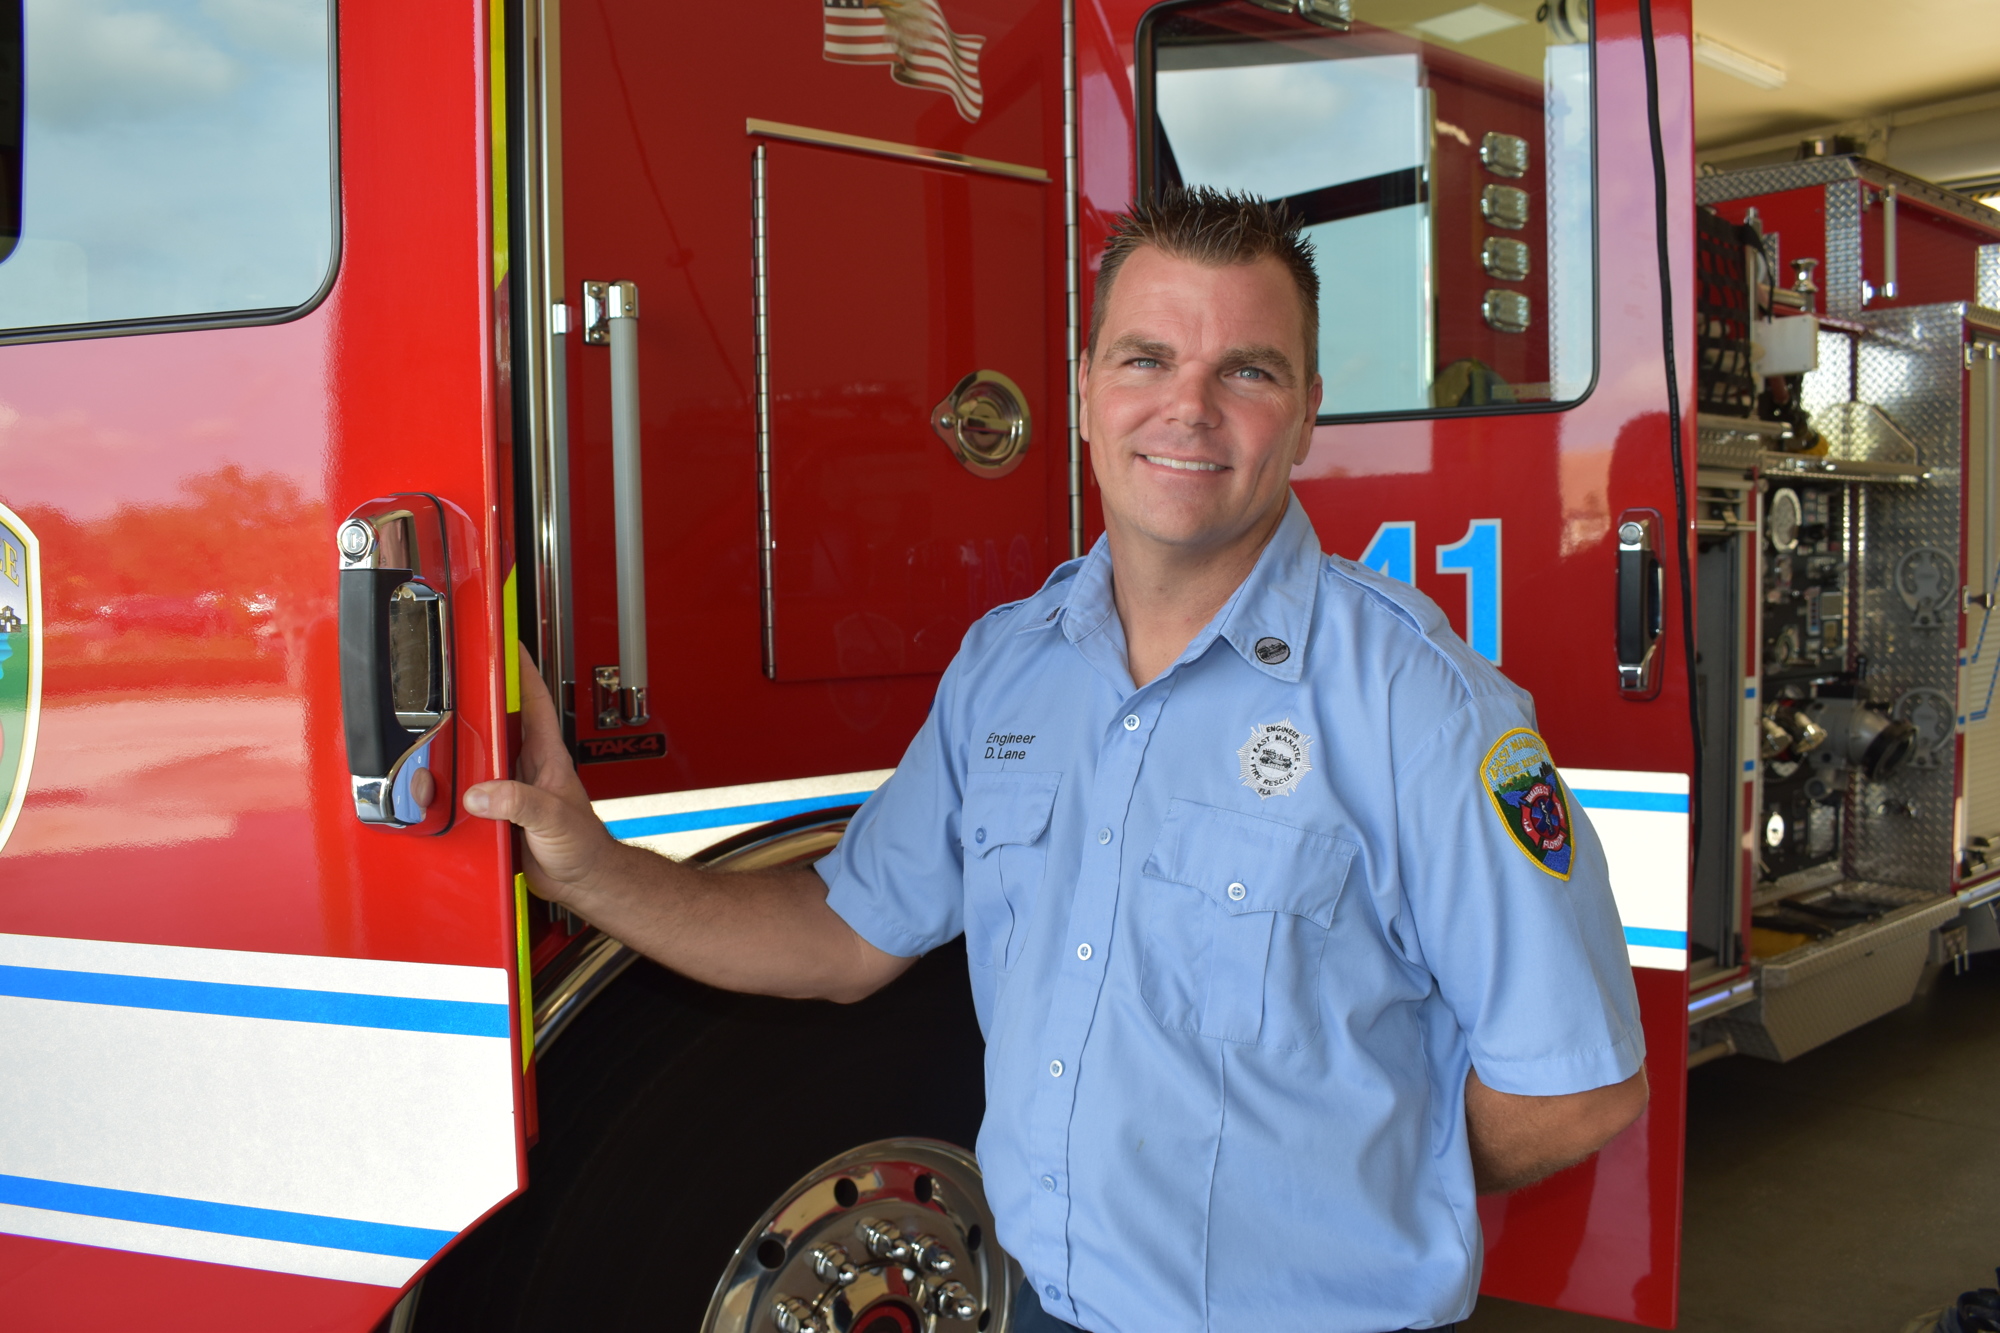 Daniel Lane received the Lifesaving Award from the East Manatee Fire Rescue in April.